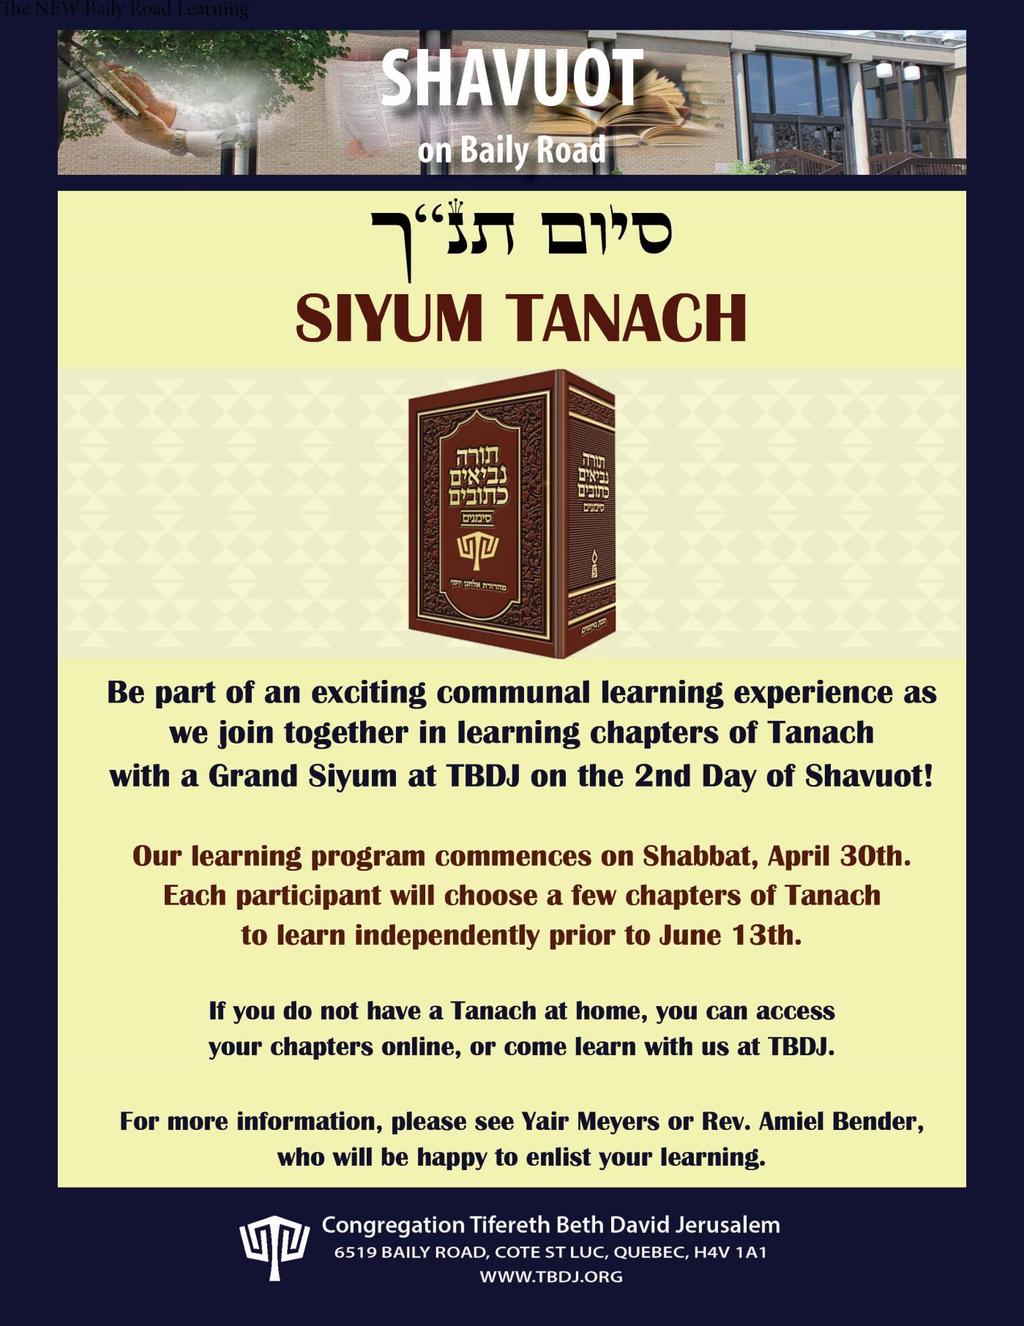 Access your Tanach chapters online here: http://www.